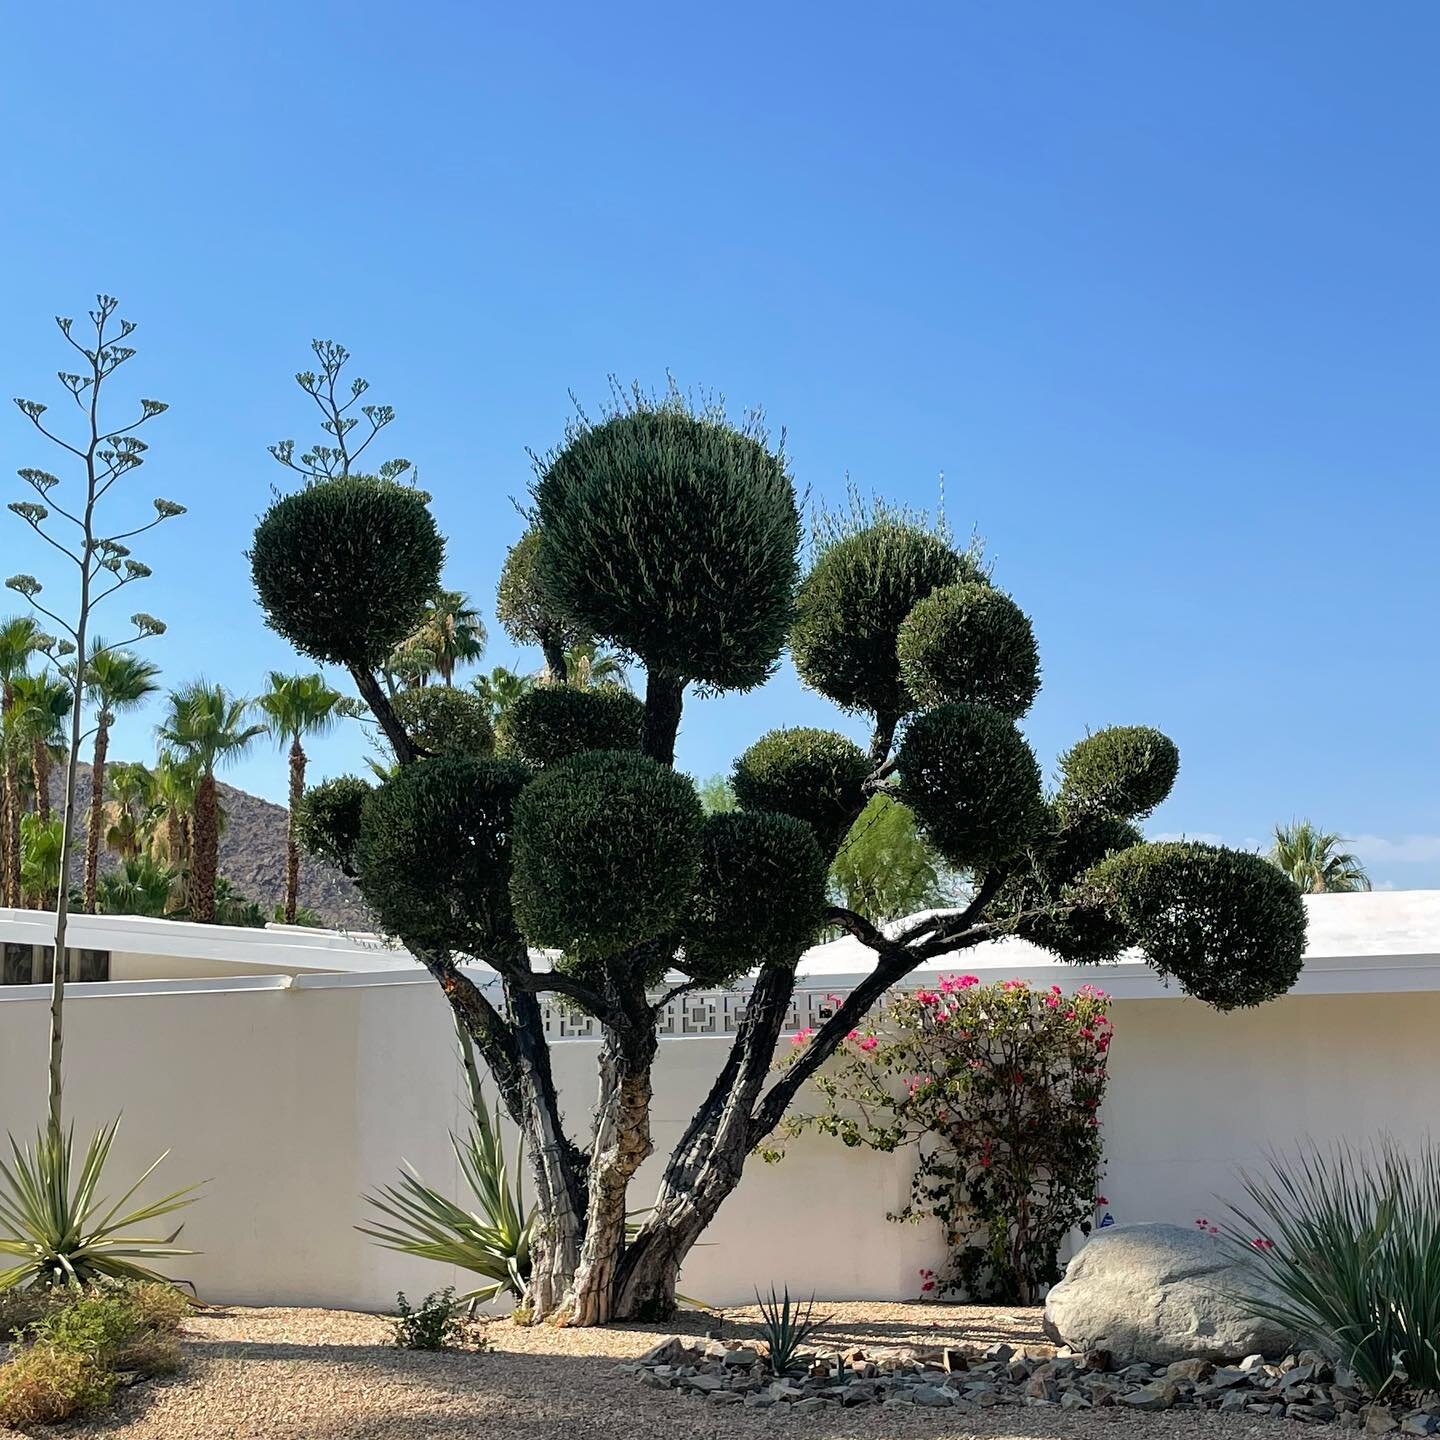 Each Alexander home in Vista Las Palmas came with a signature olive tree. Many still exist and thrive all these years later. Here are a few of our favorites! #olivetree #vistalaspalmas #vlpno #vlpnowhereelse #alexanderhomes #palmsprings